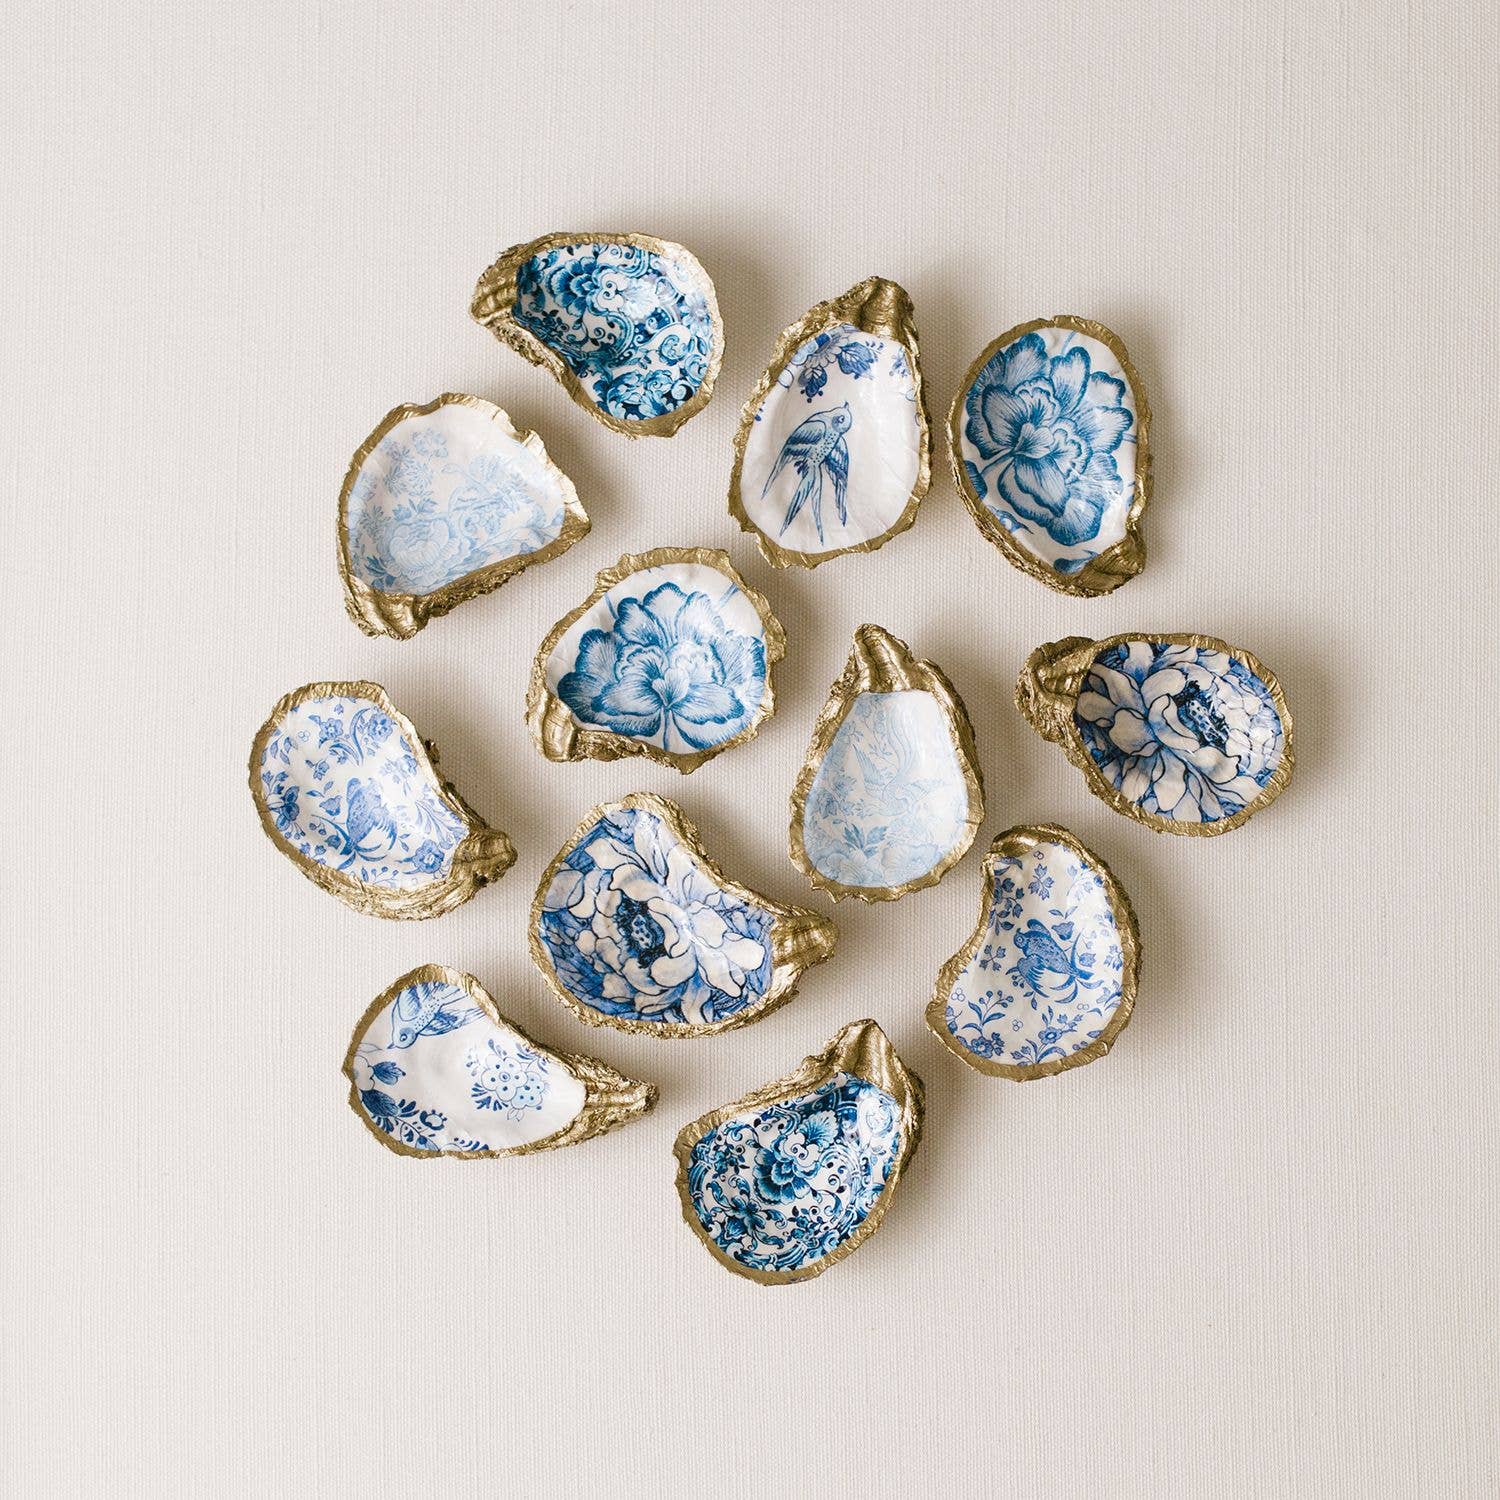 Indigo Decoupage Oyster Ring Dish (Butterfly)